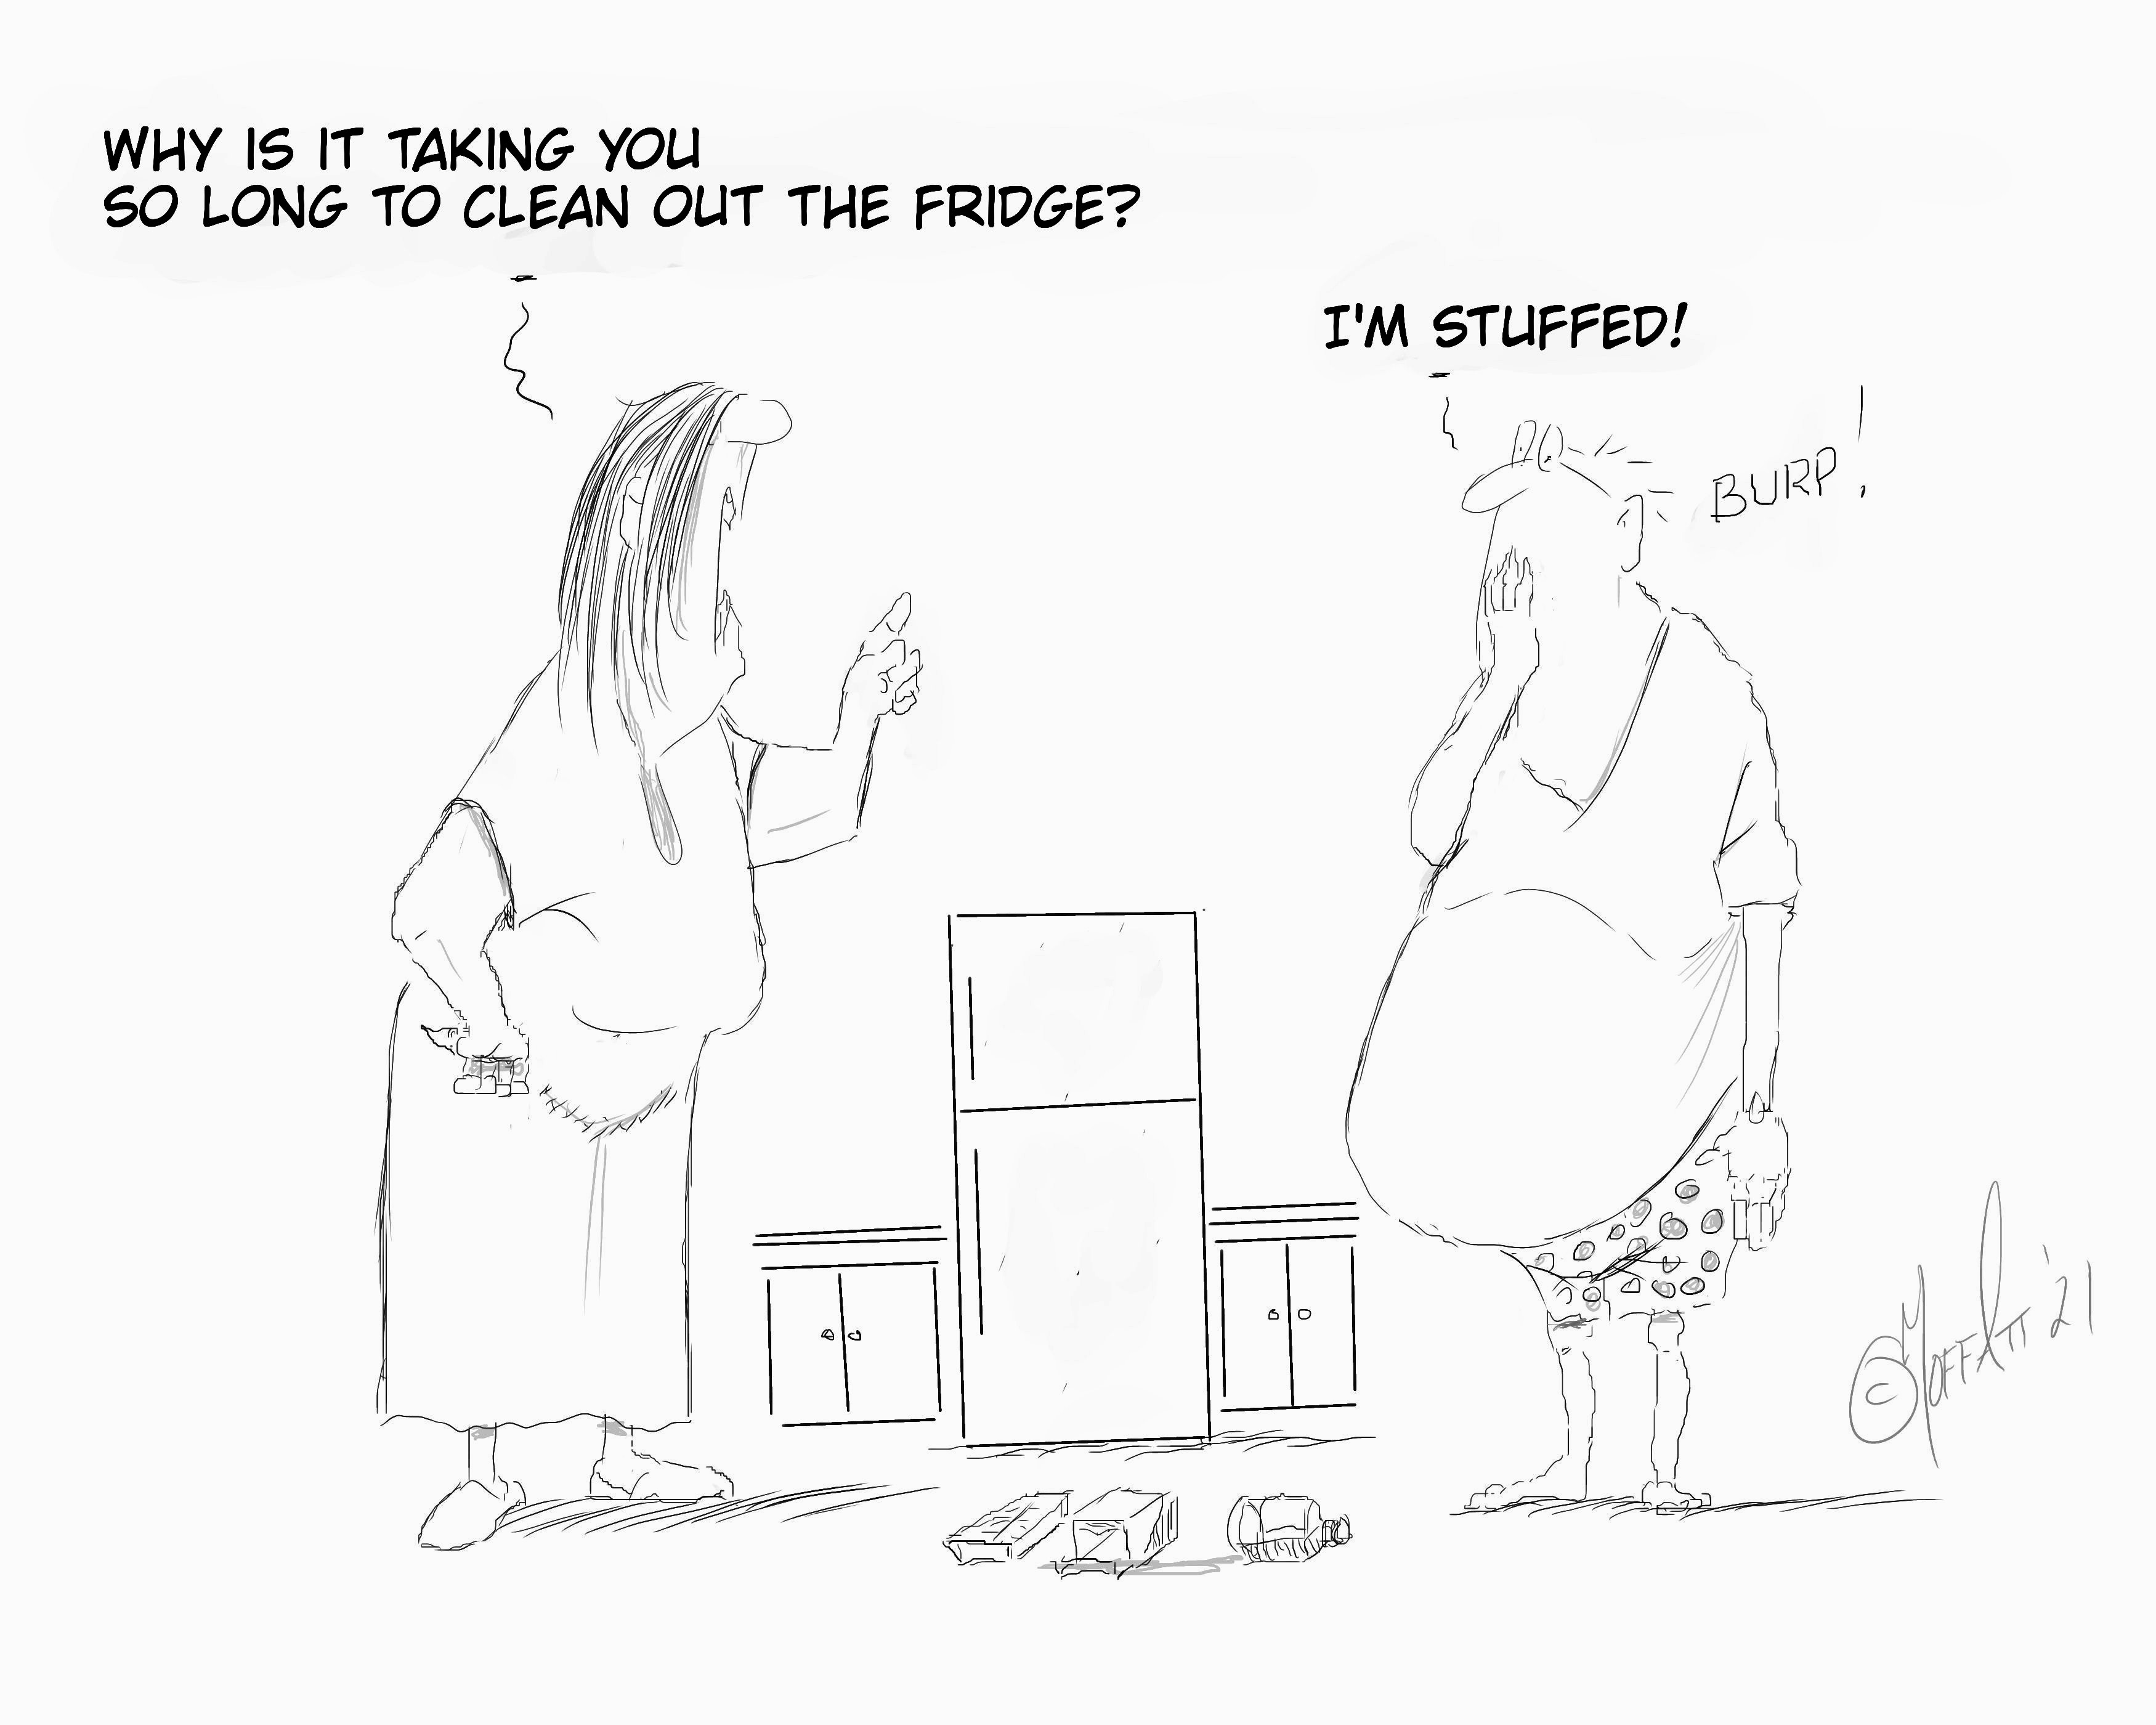 funny cleaning cartoon